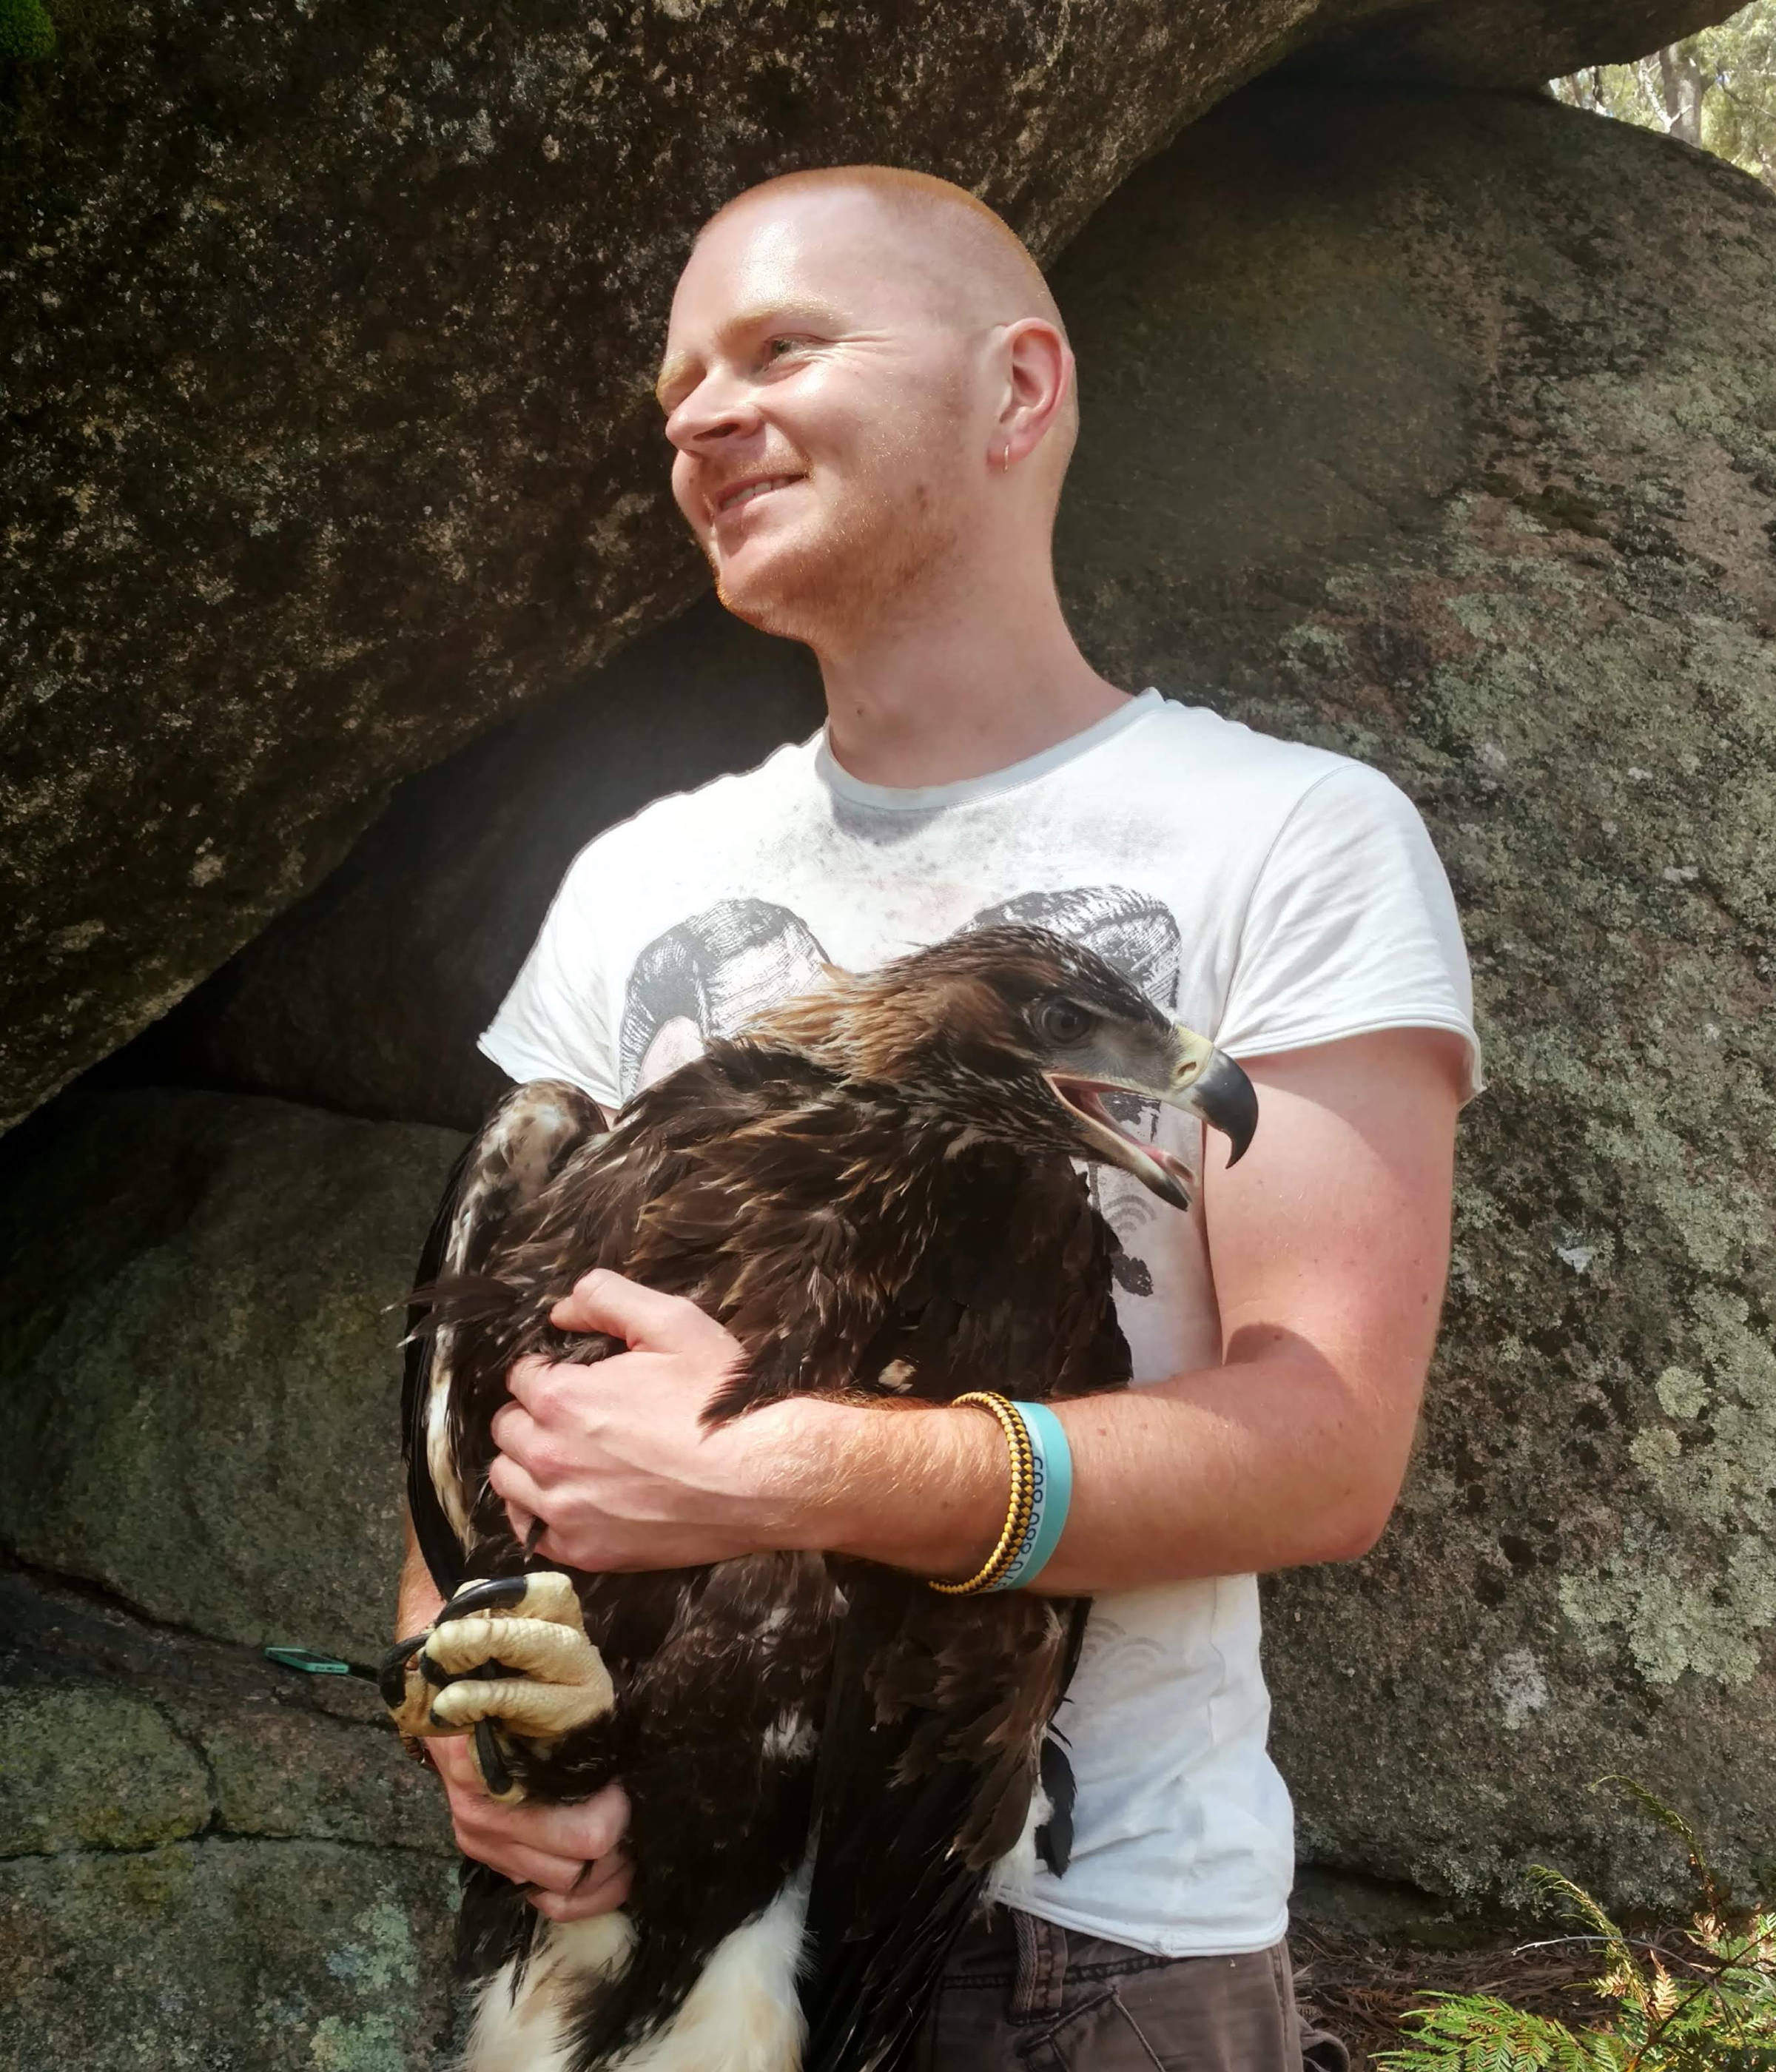 University researcher James Pay holds a temporarily captured young wedge-tailed eagle in order to place a GPS tracker on it, in the first study of Tasmanian wedge-tailed eagle movement ecology. Photo: James Pay.